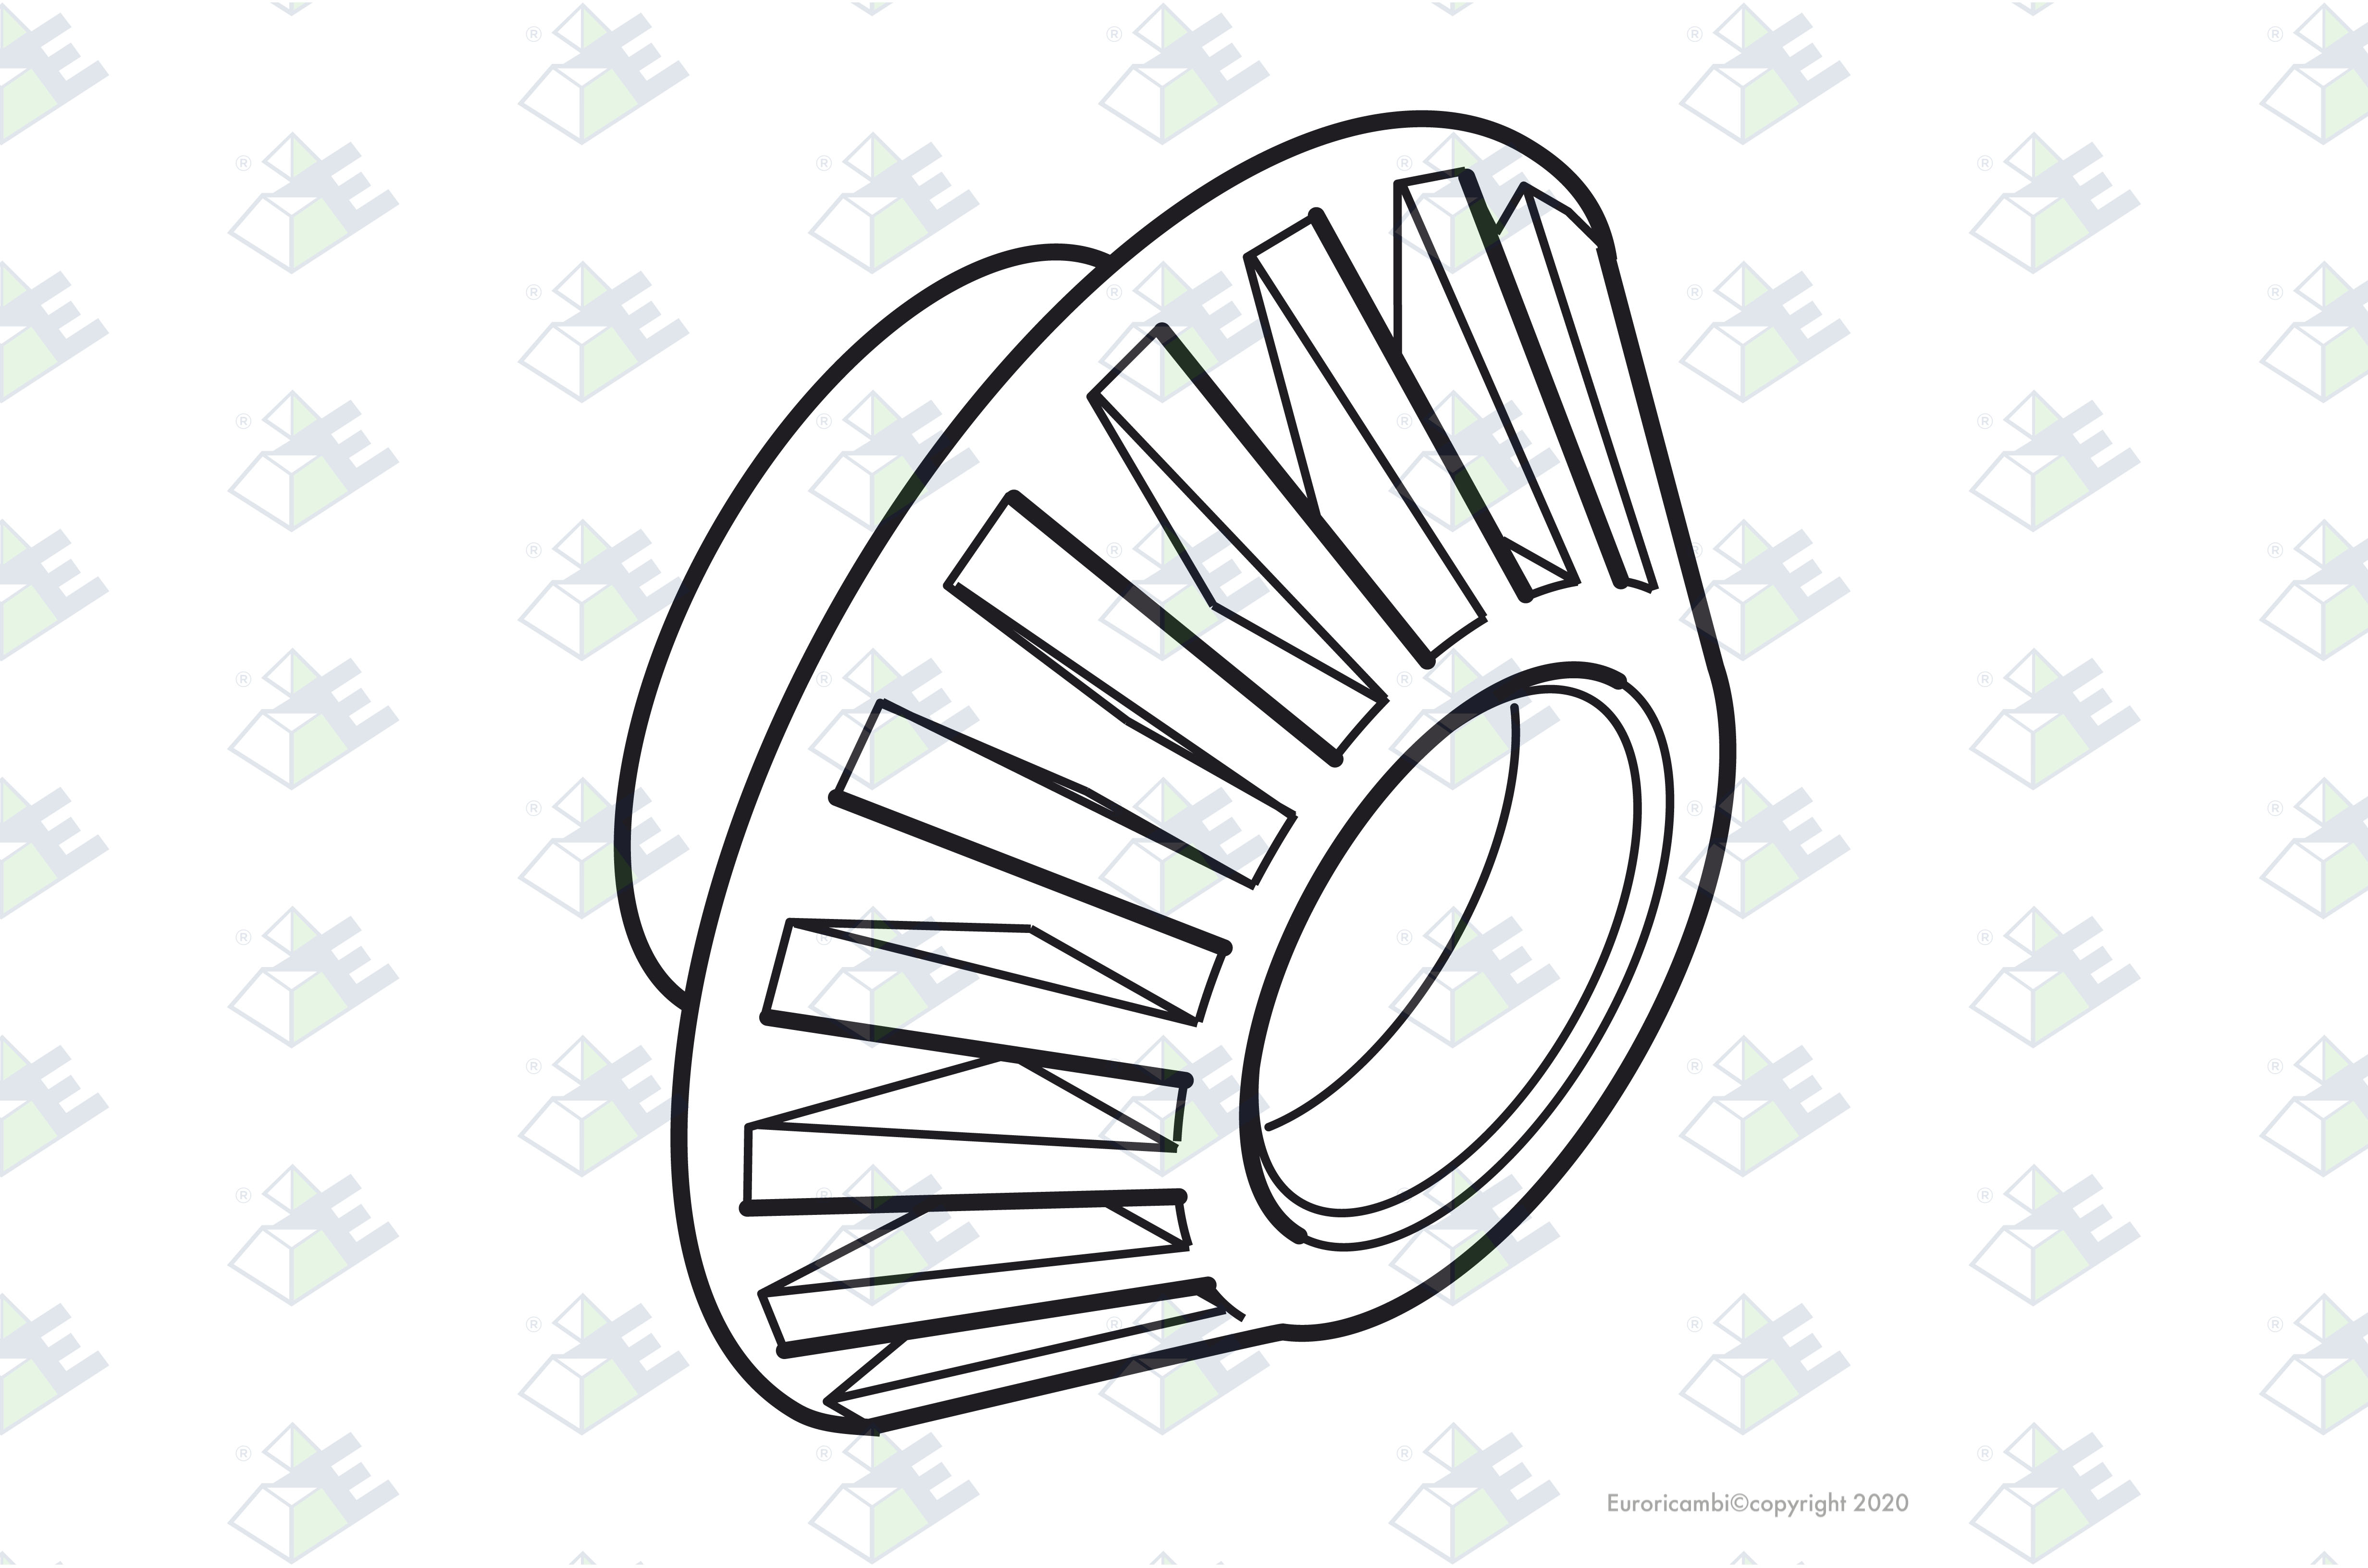 SIDE GEAR 16 T - 40 SPL. suitable to DAF 0658089